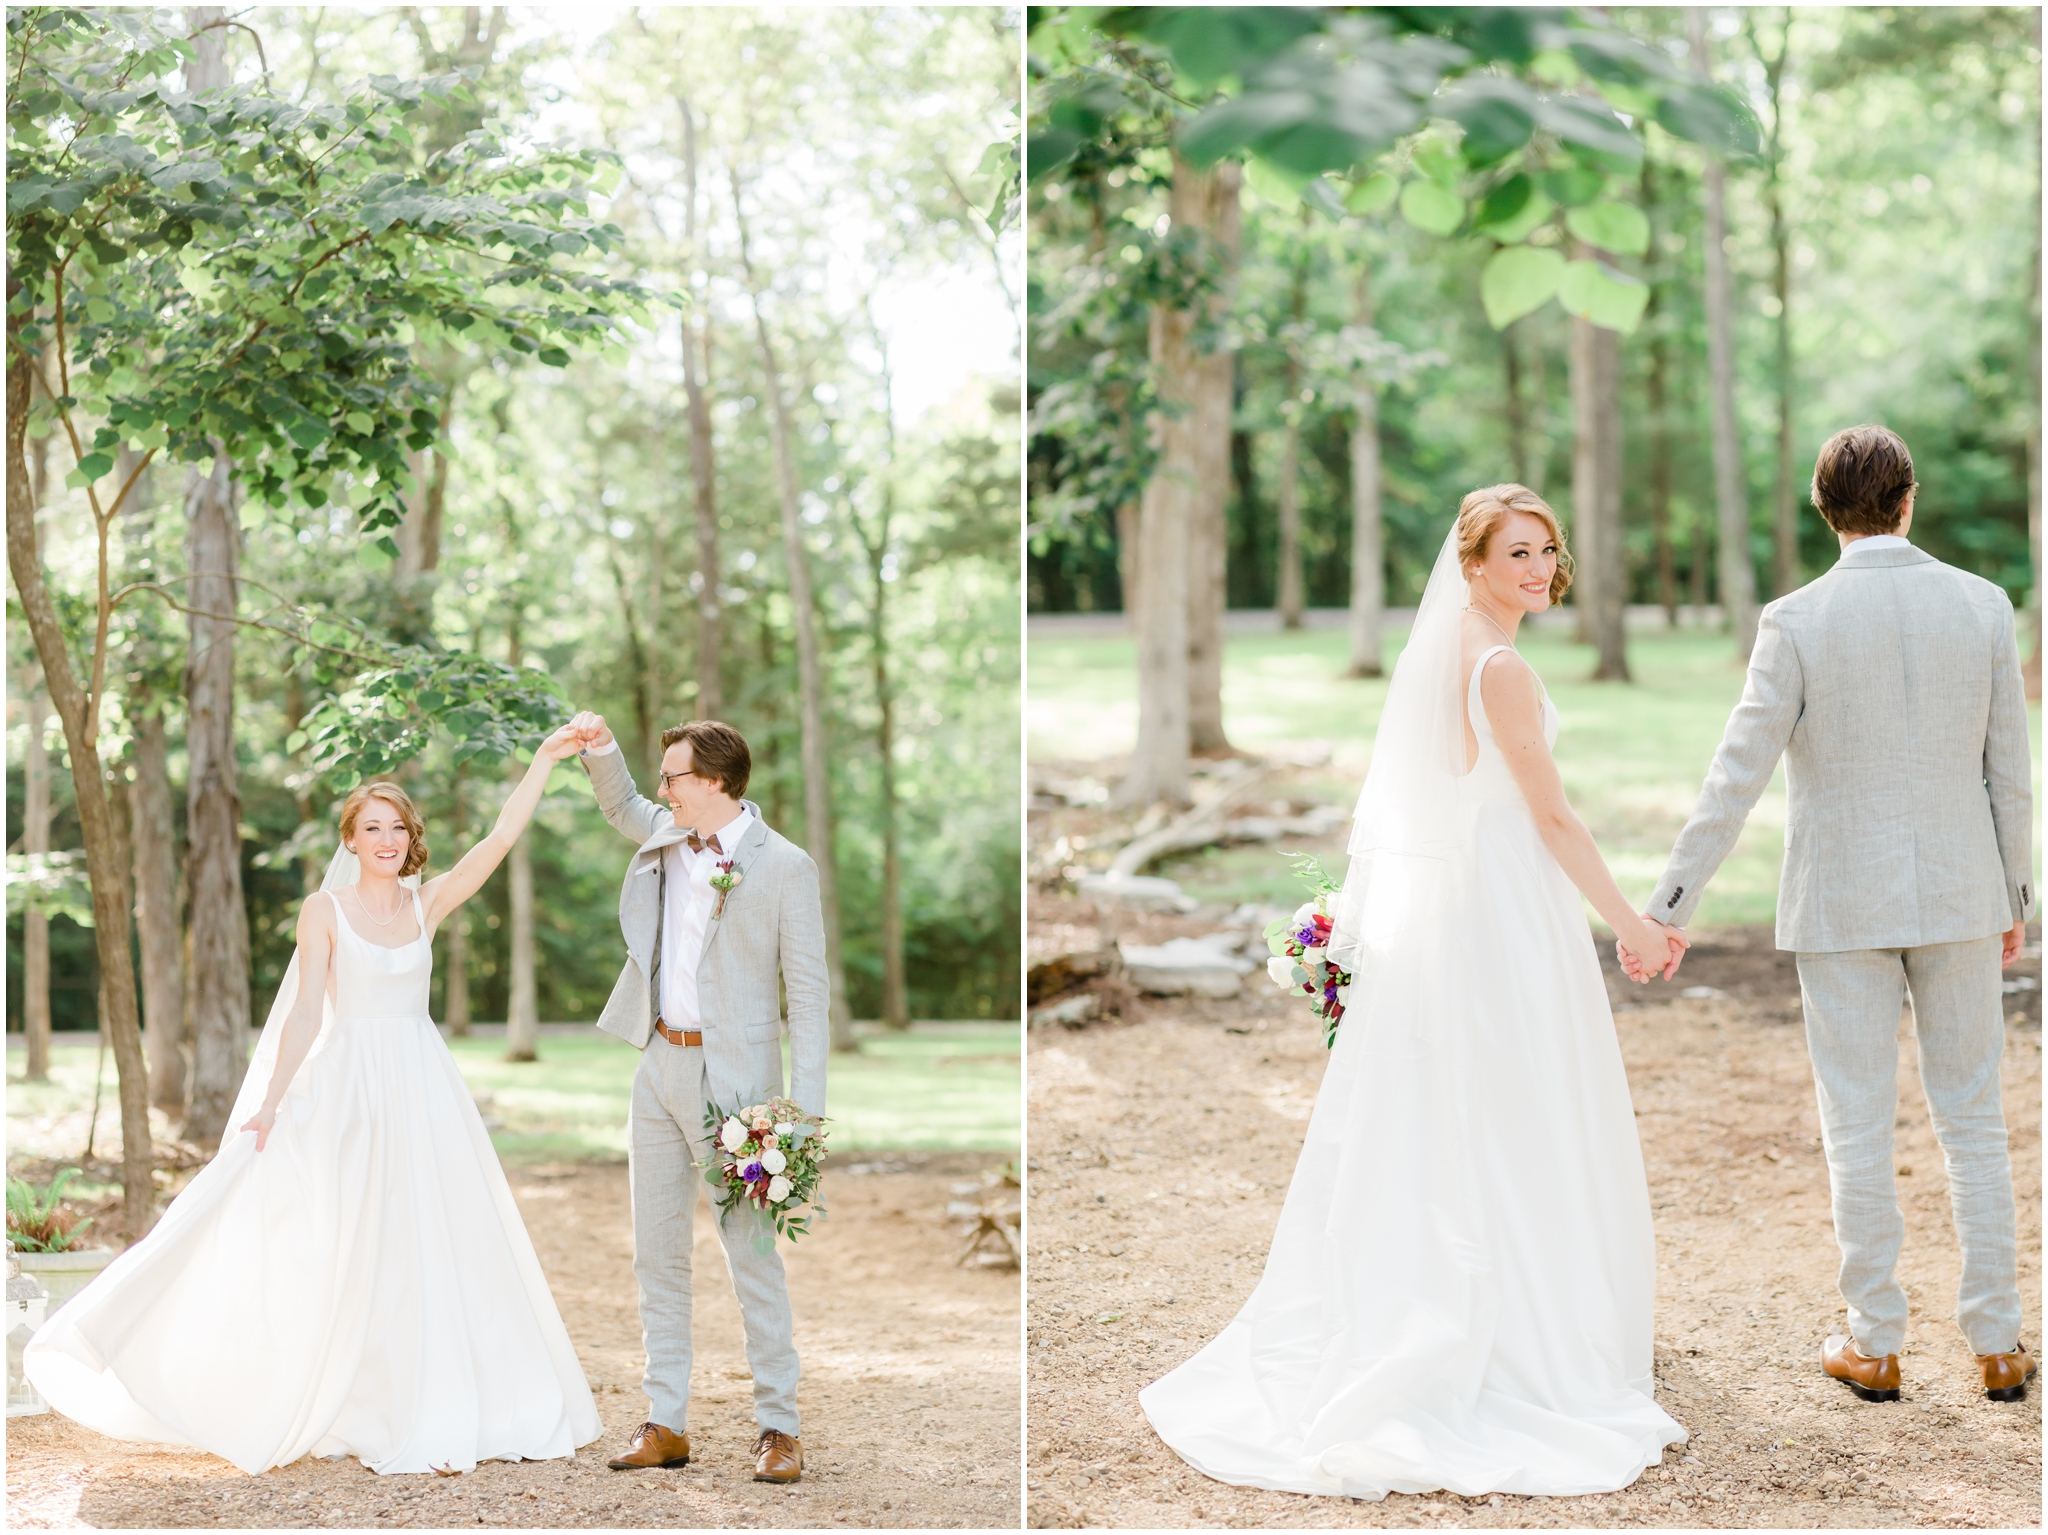 4 Outdoor Small Wedding Venues in Chattanooga, TN by Alyssa Rachelle Photography